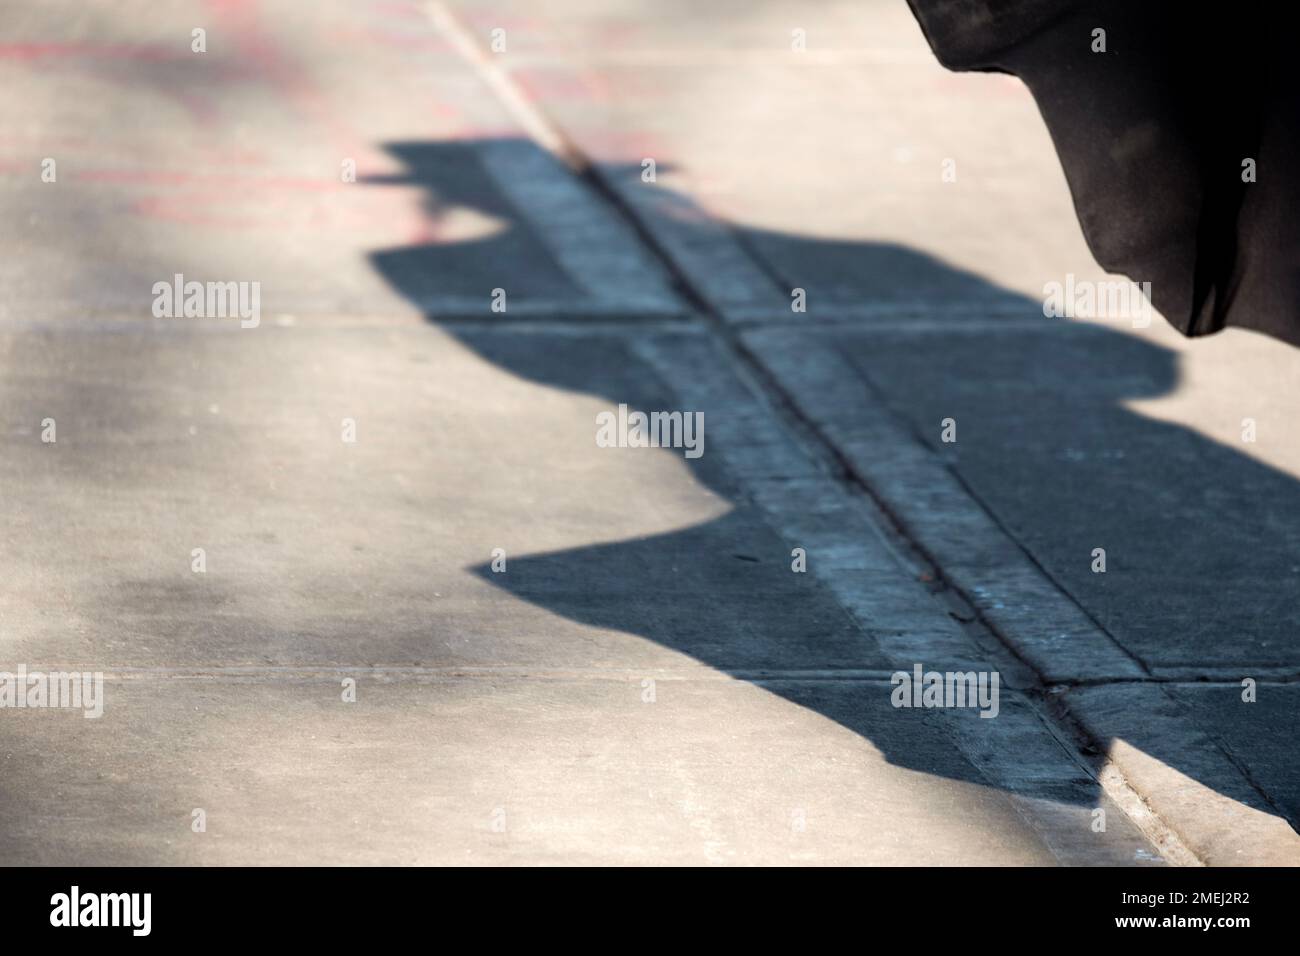 Shadow of a Hasidic man with peyus. Crossing Lee Avenue in Williamsburg, Brooklyn, New York. From his hat he's likely a member of the Stamar group. Stock Photo